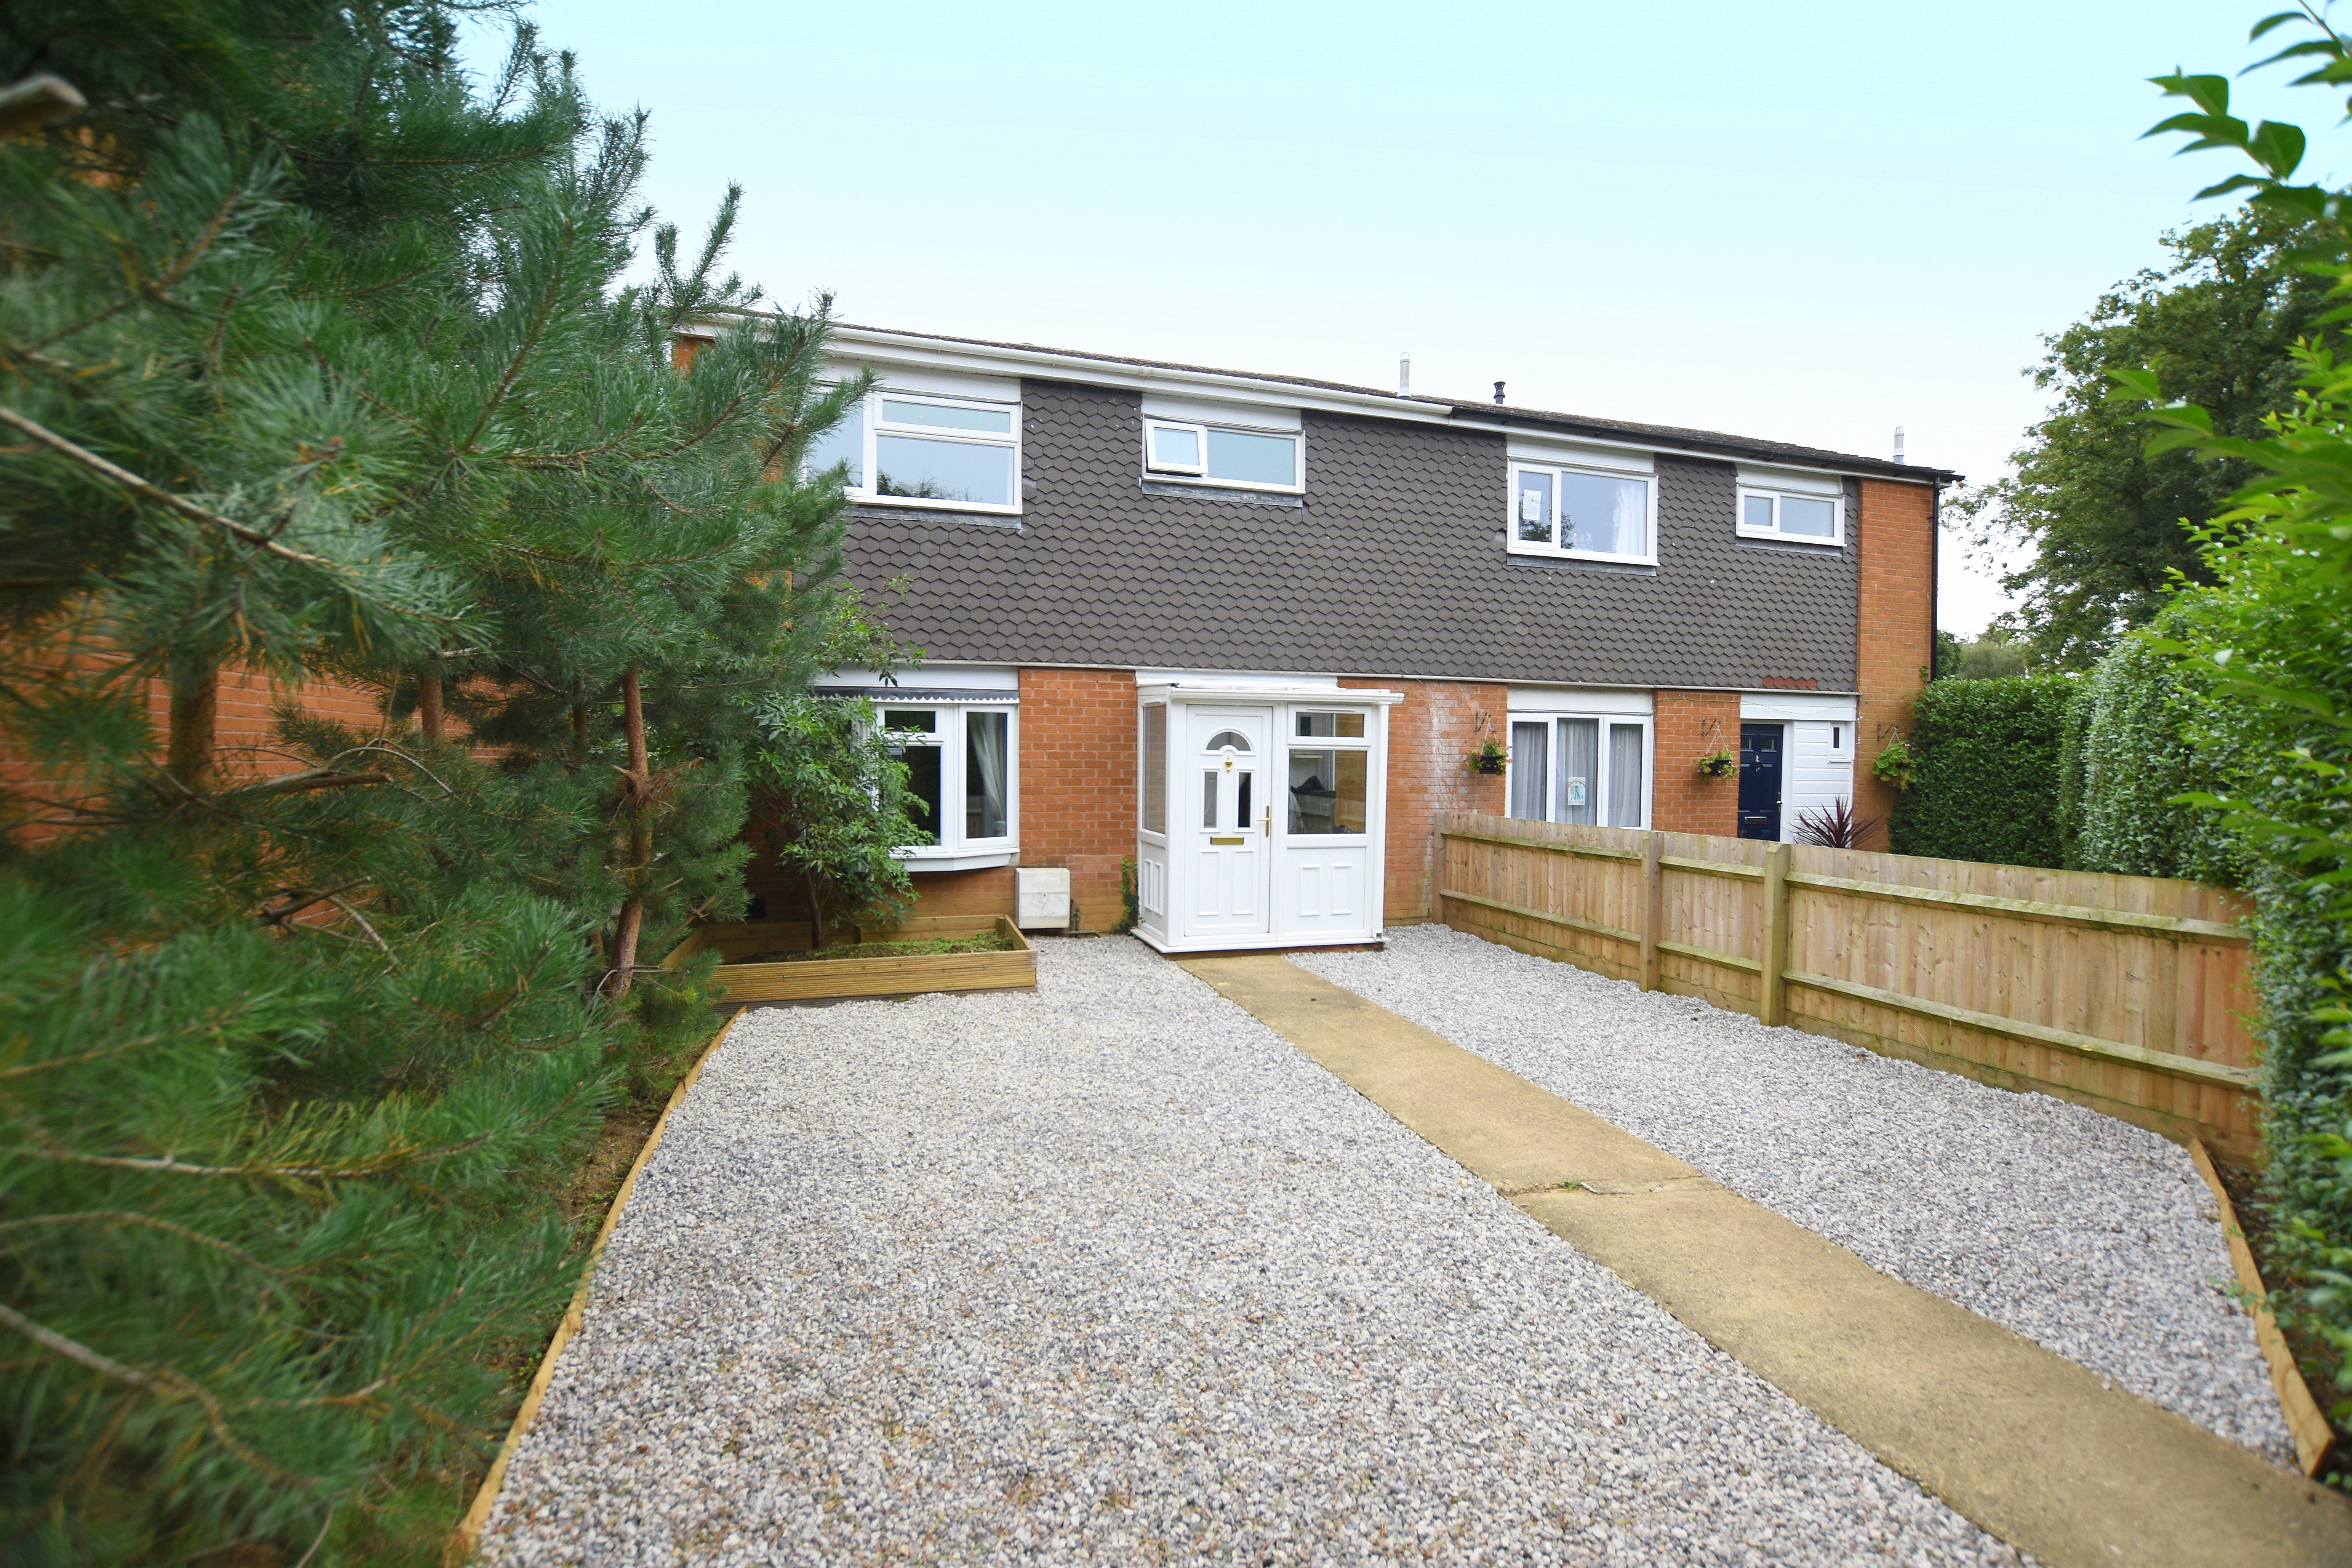 3 bed  for sale in Portway, Banbury  - Property Image 1